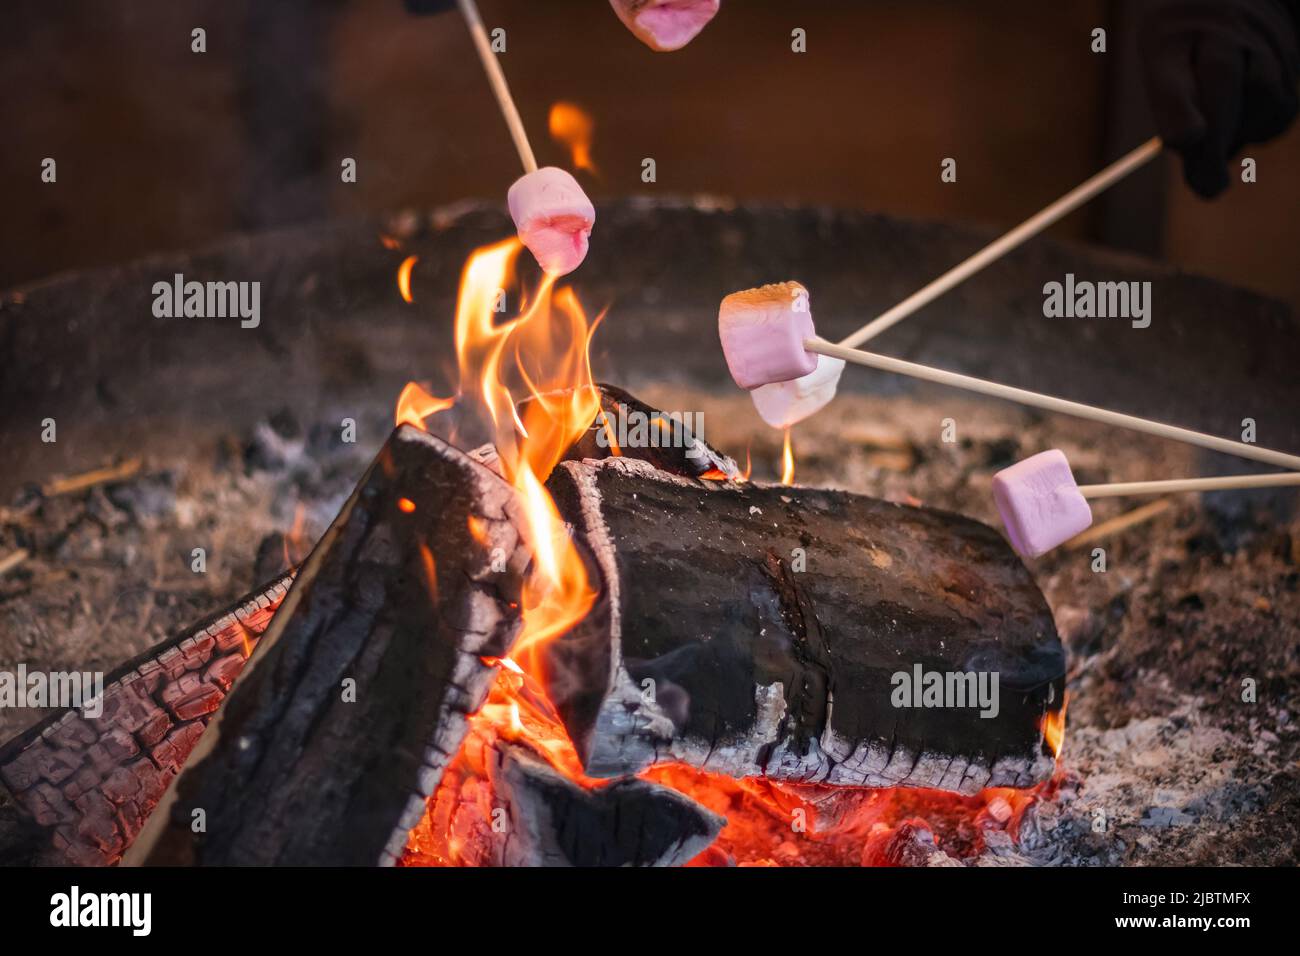 Toasting a marshmallow over an open flame at Christmas market Hyde Park Winter Wonderland in London Stock Photo